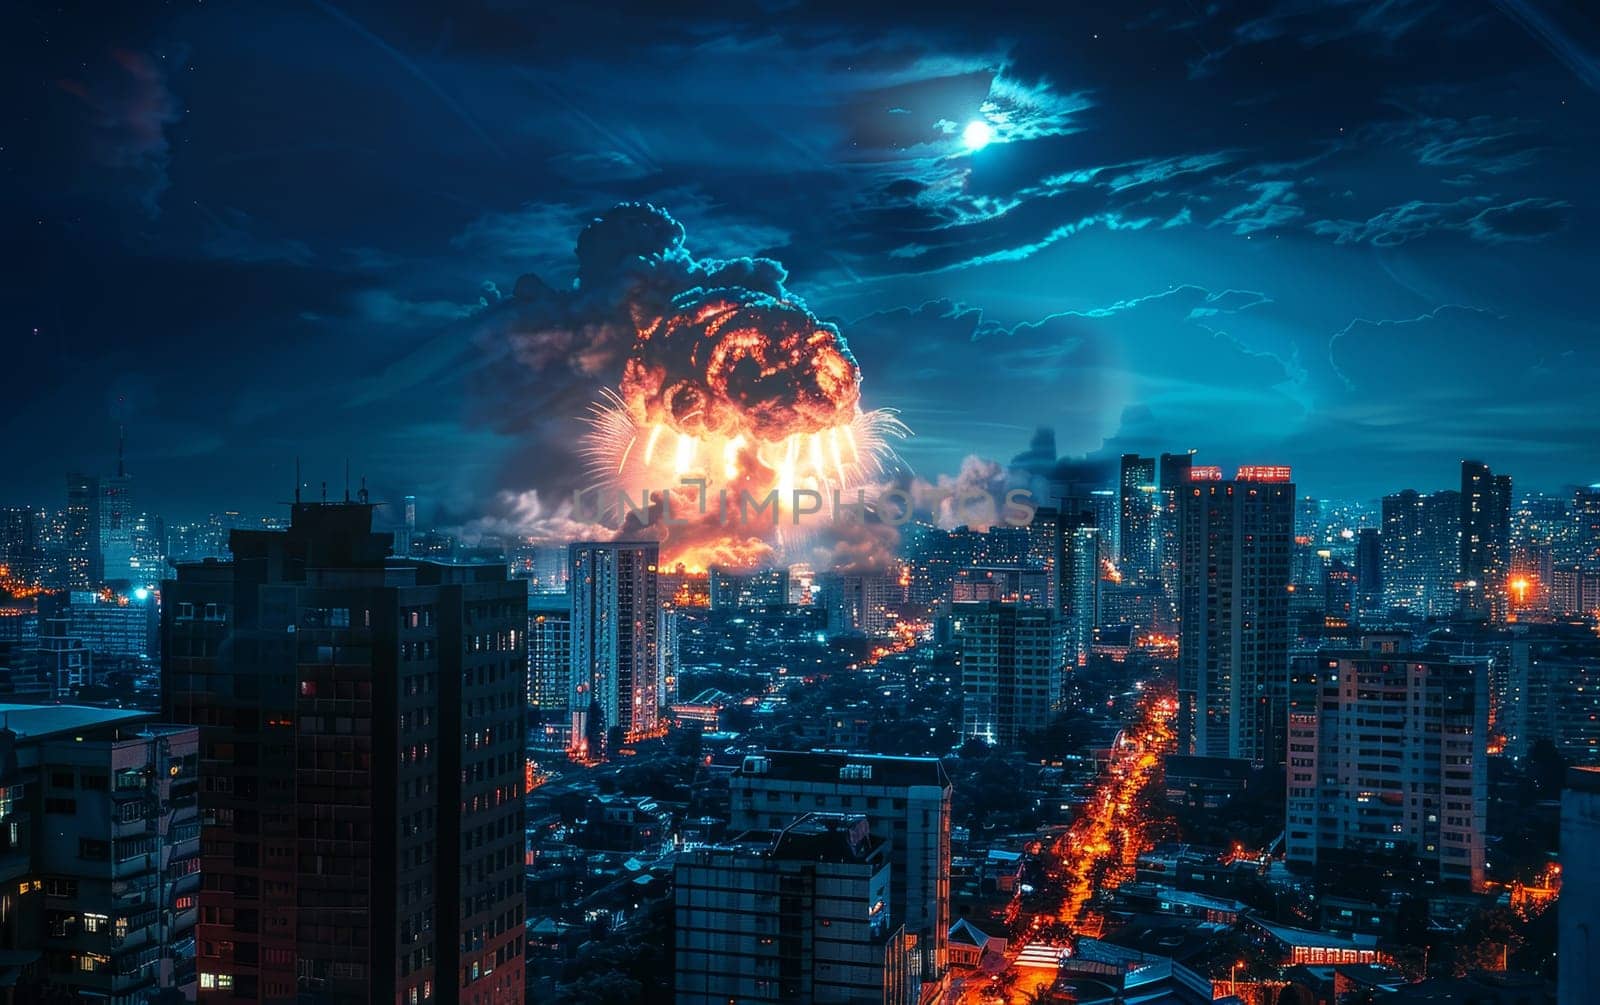 A spectacular nuclear explosion erupts in the night sky above a city, its fiery plumes creating a stark contrast against the urban skyline. by sfinks